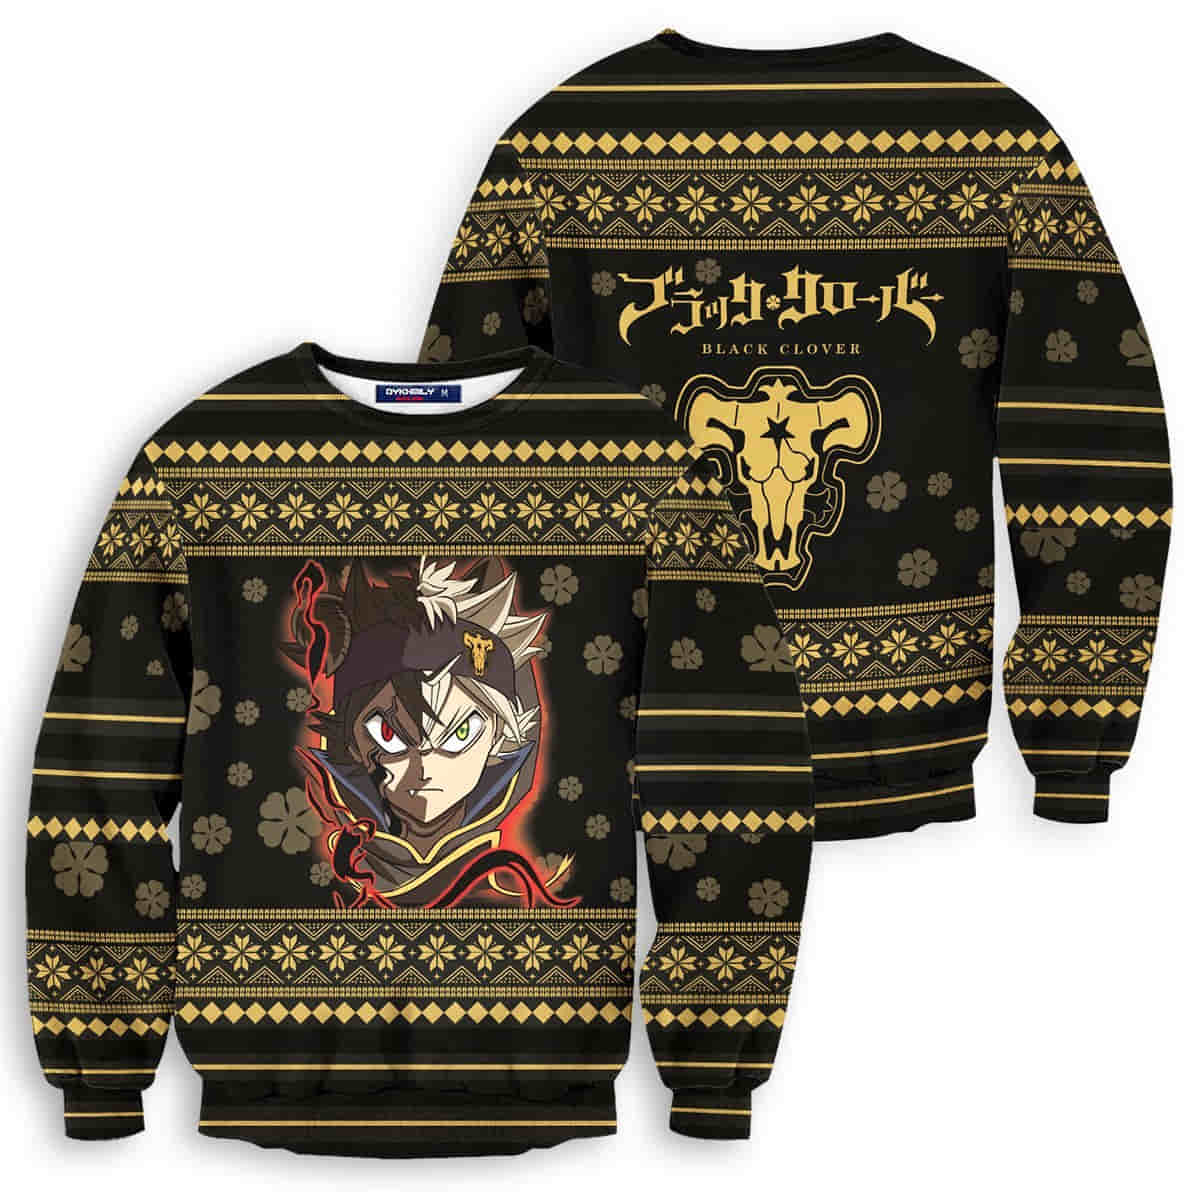 Black Clover Sweater, Black Clover Christmas Wool Knitted Sweater